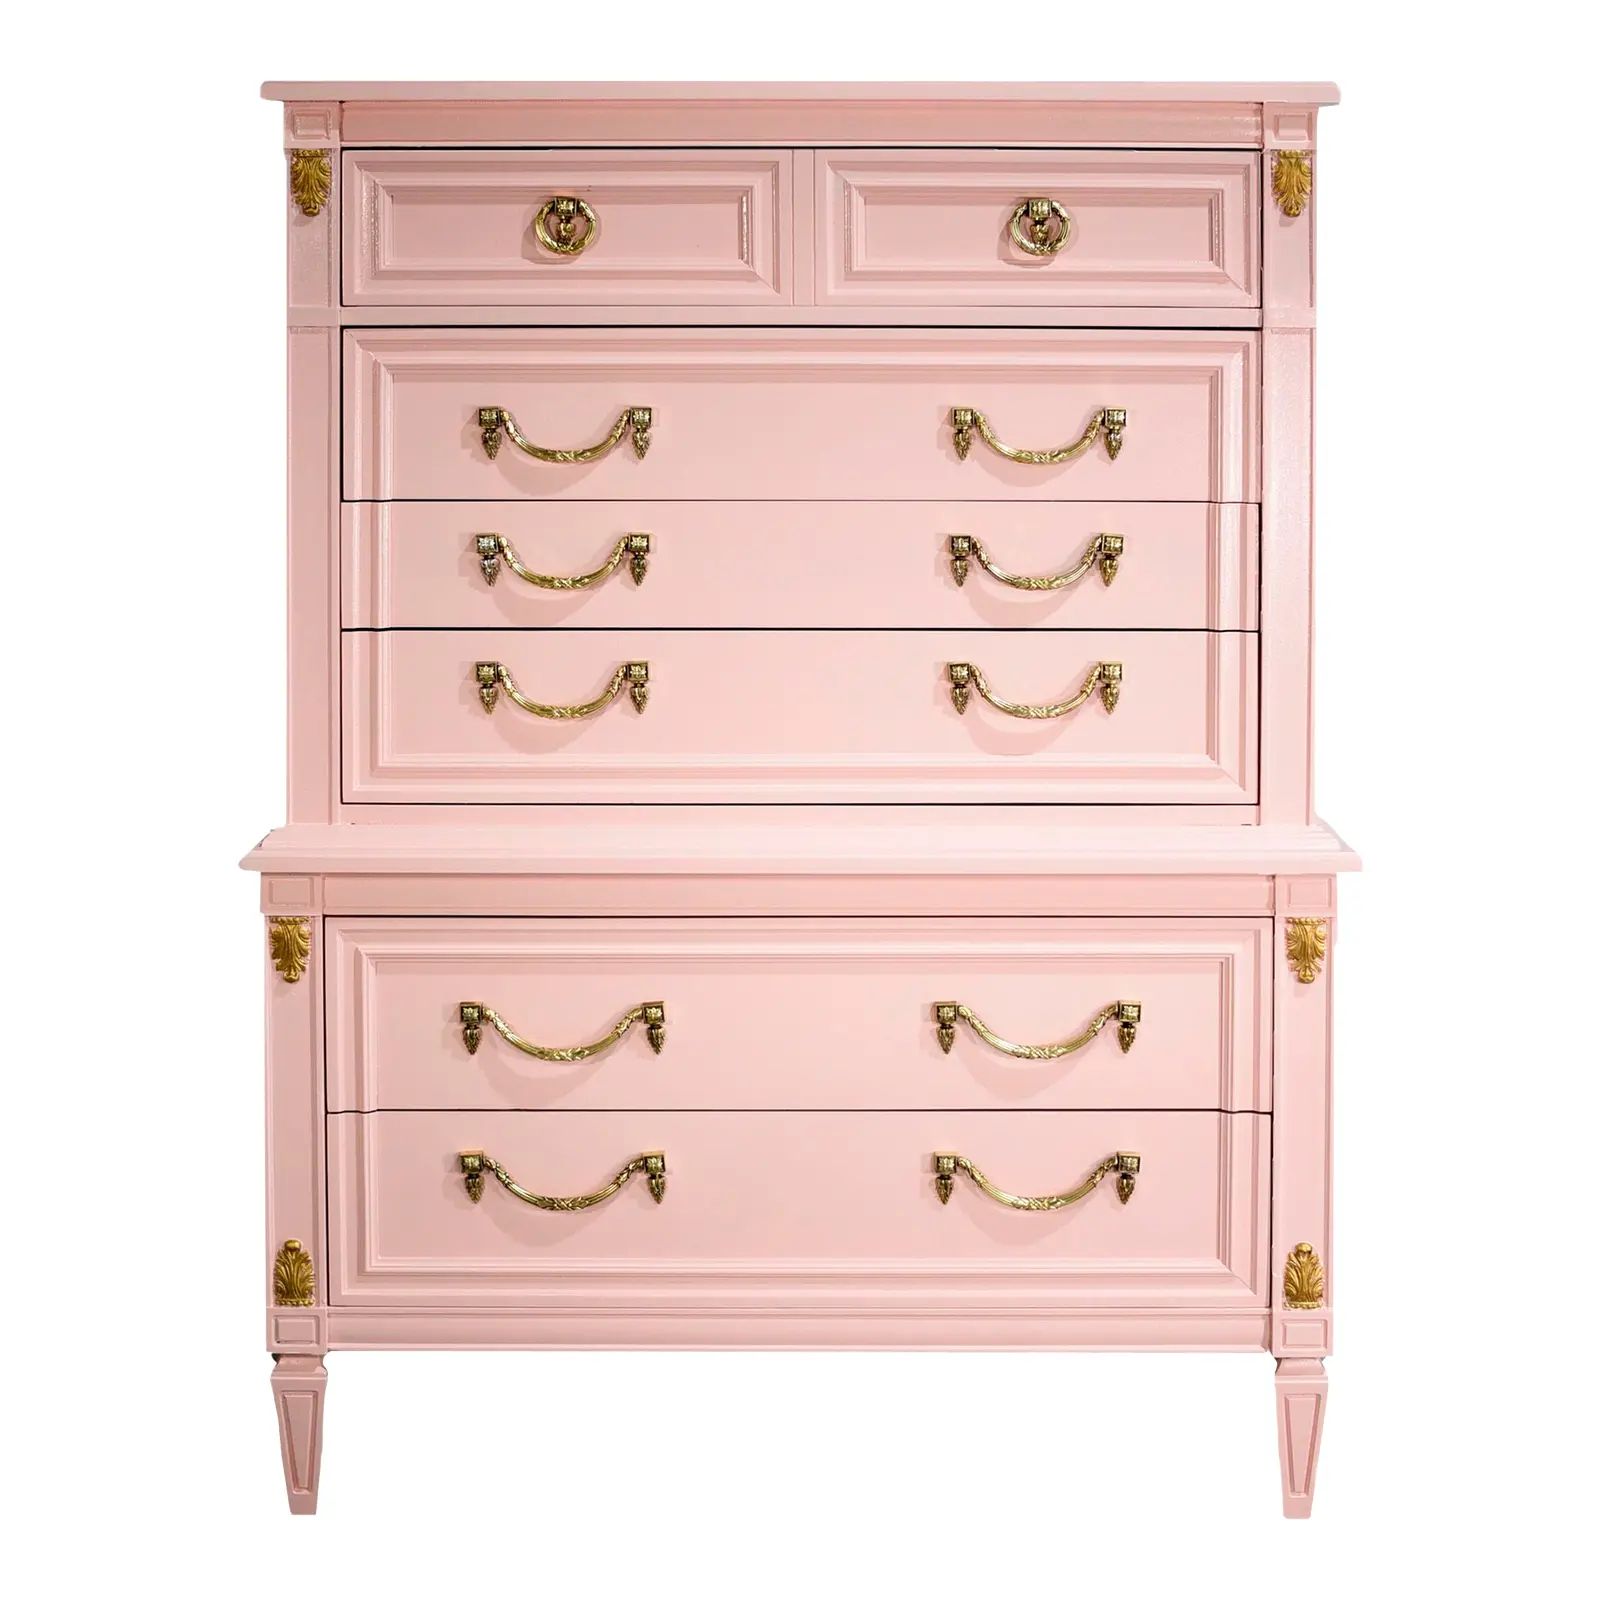 Vintage Neoclassical Highboy With Wreath Brass Hardware in Pink - Newly Painted | Chairish